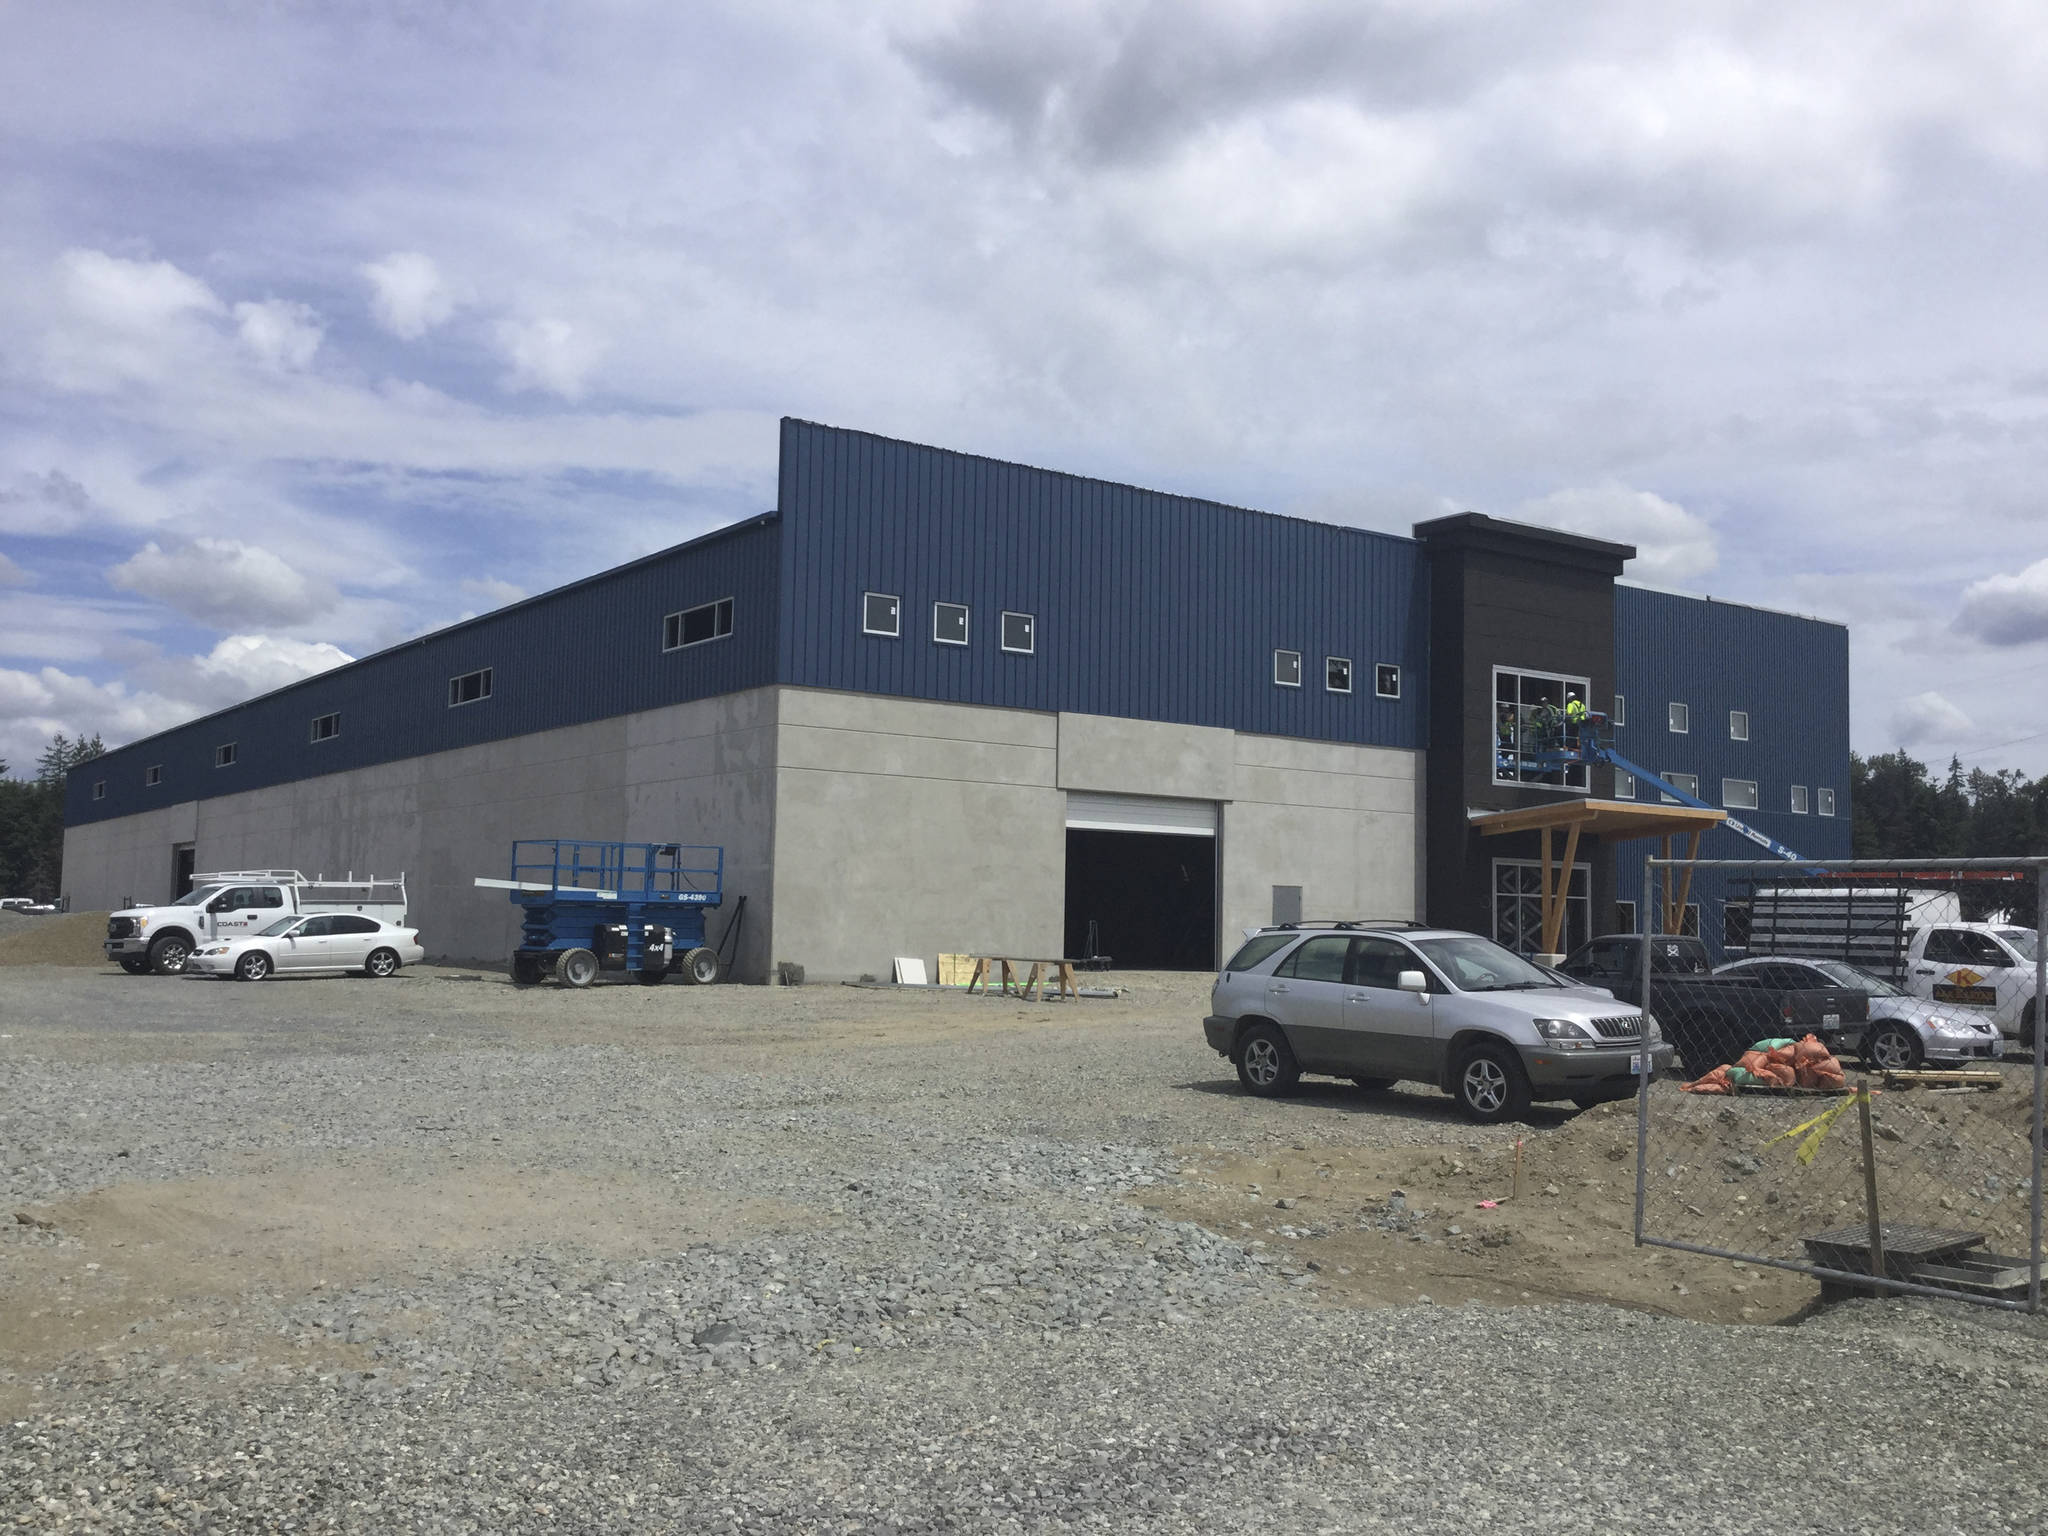 Dantrawl, a fishing and industrial supplies company, is located near where the new 63rd Avenue NE will punch through heading north.